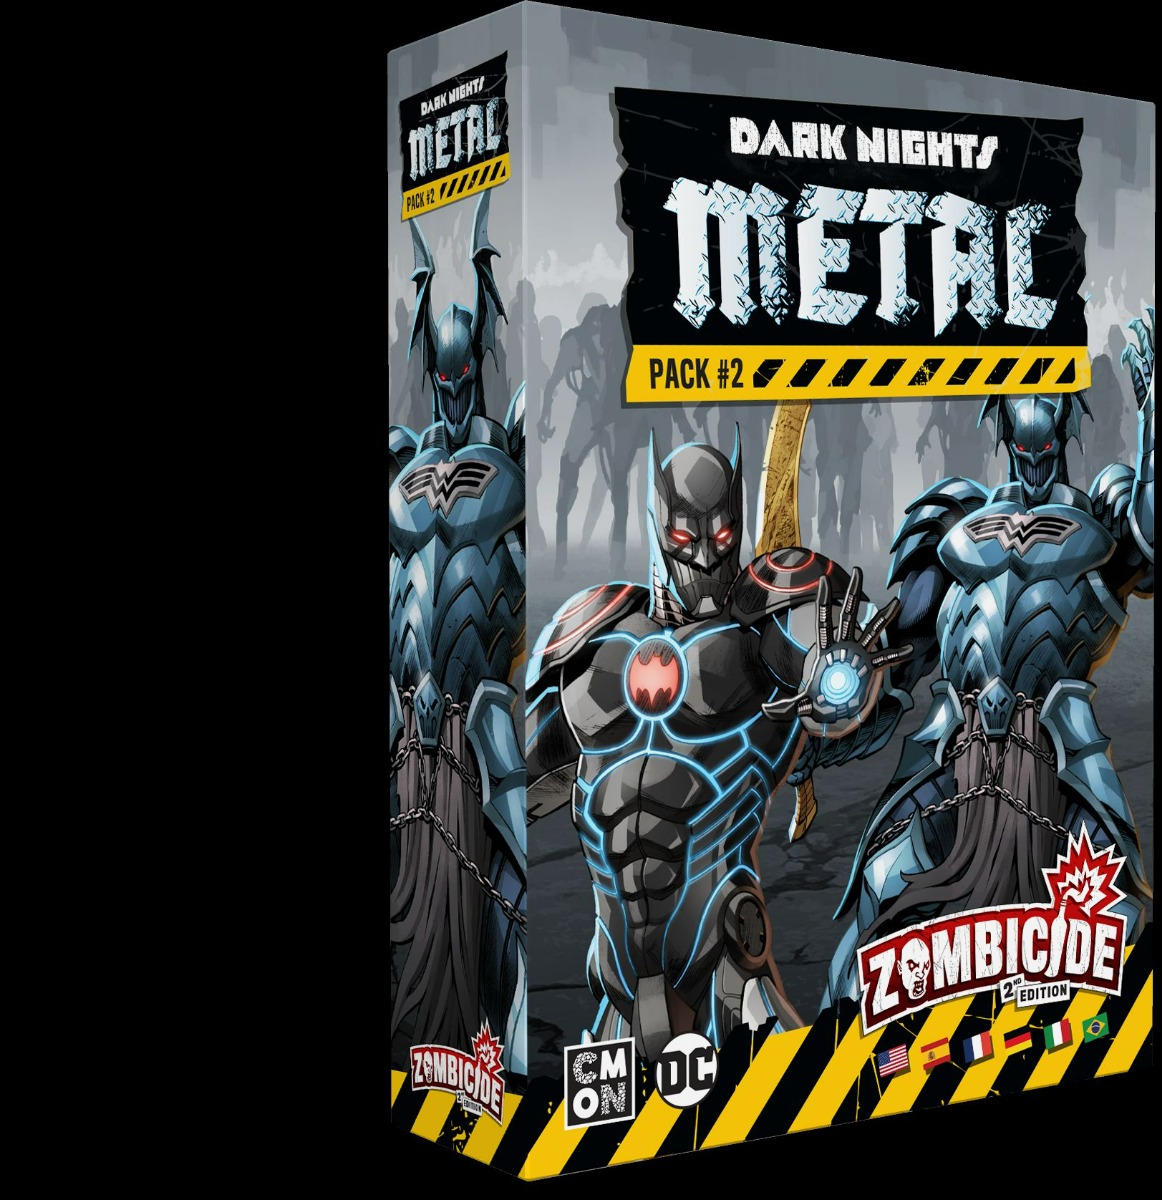 Zombicide 2nd Edition: Dark Nights Metal - Pack #1 – LingSter Games